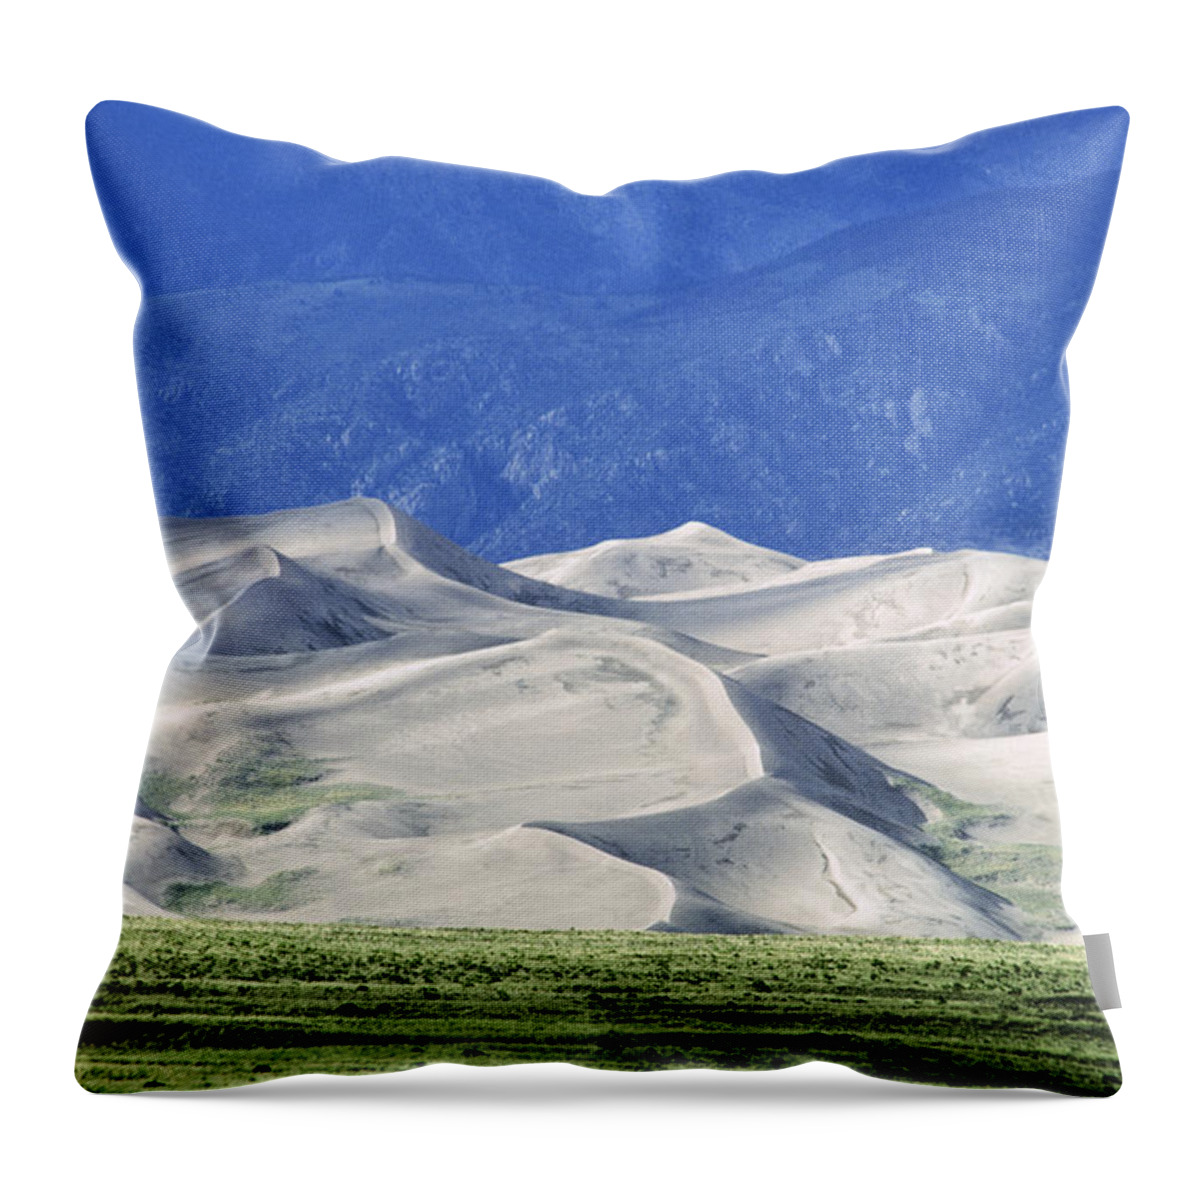 Great Sand Dunes National Park Throw Pillow featuring the photograph Great Sand Dunes National Park by James L. Amos